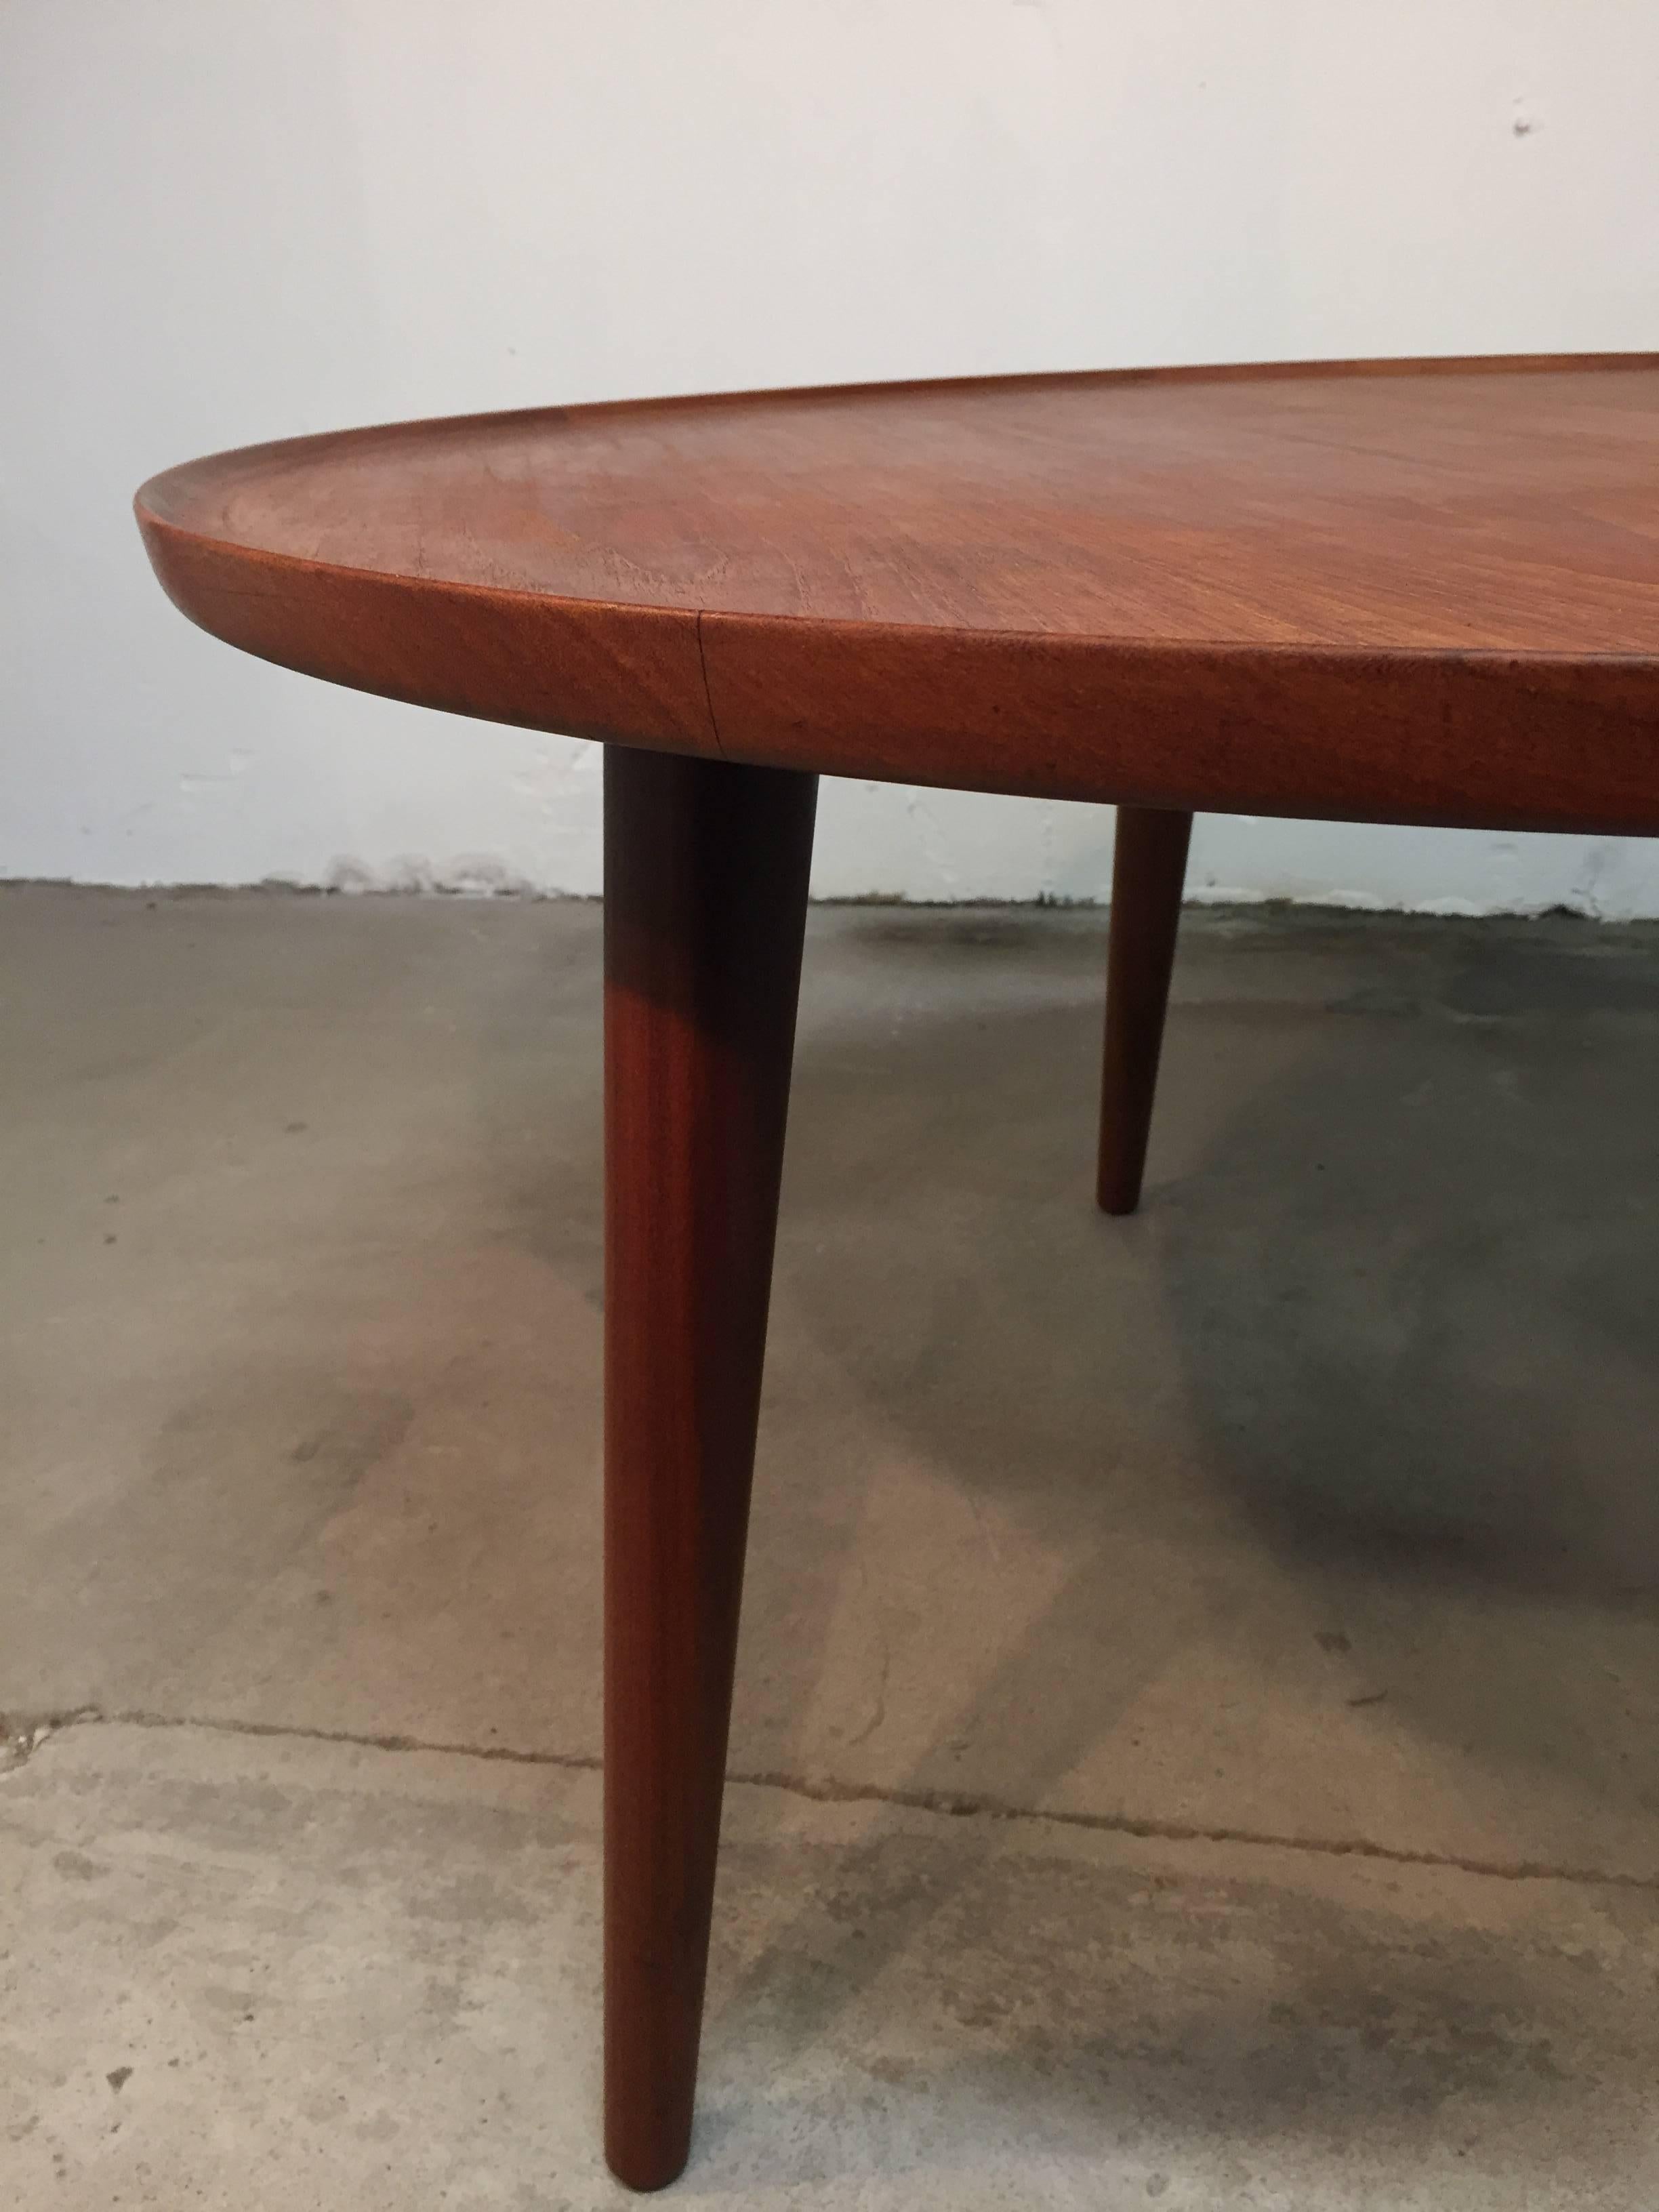 This beautiful circular coffee table in teak, has some amazing details, with angled legs and raised edge. There is no stamp under the table but I am almost sure that it is designed by Anton Kildeberg.

The table are in good condition but has some